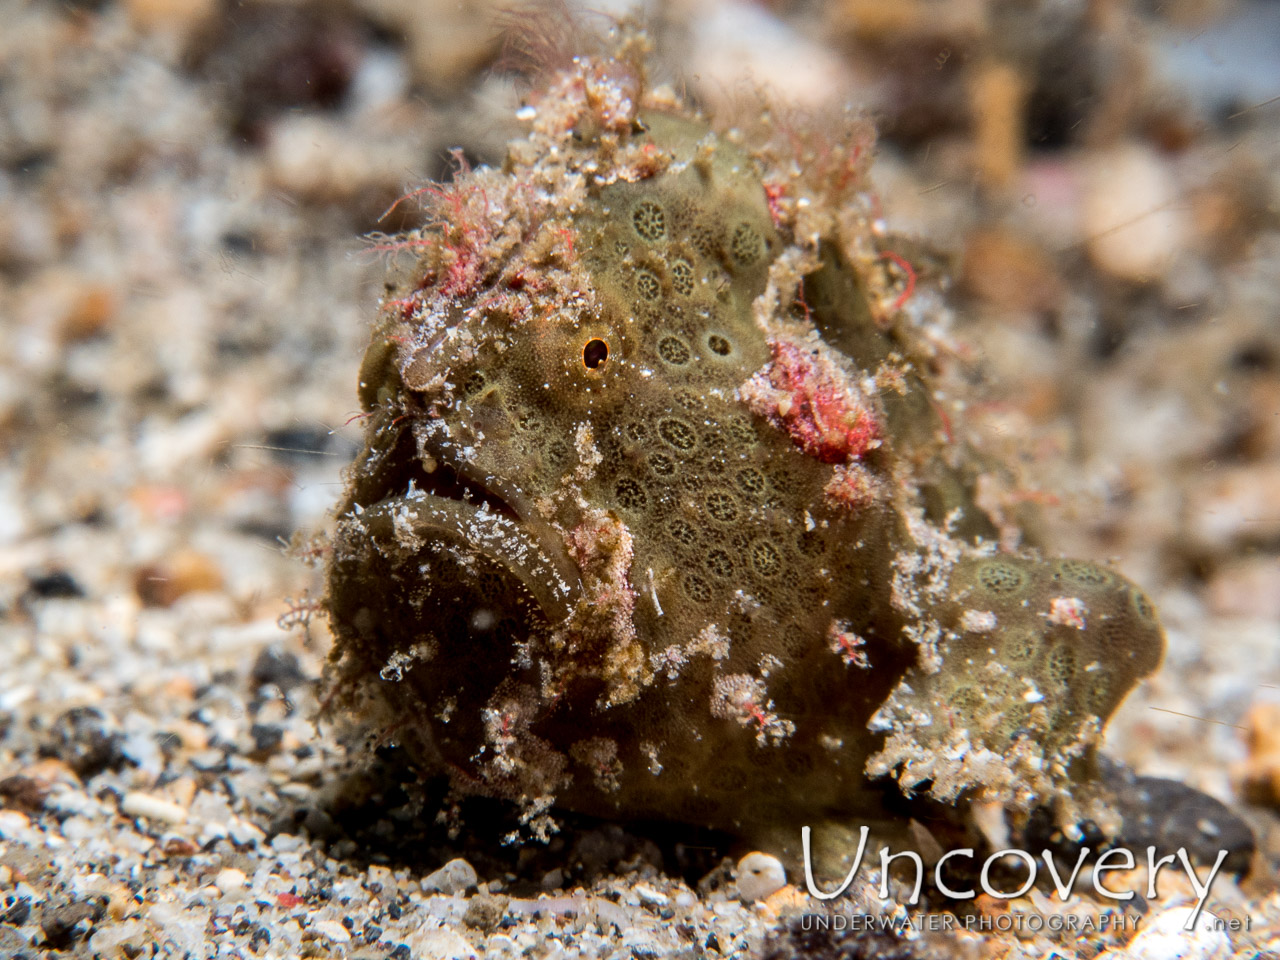 Painted Frogfish (antennarius Pictus), photo taken in Indonesia, North Sulawesi, Lembeh Strait, Critter Hunt